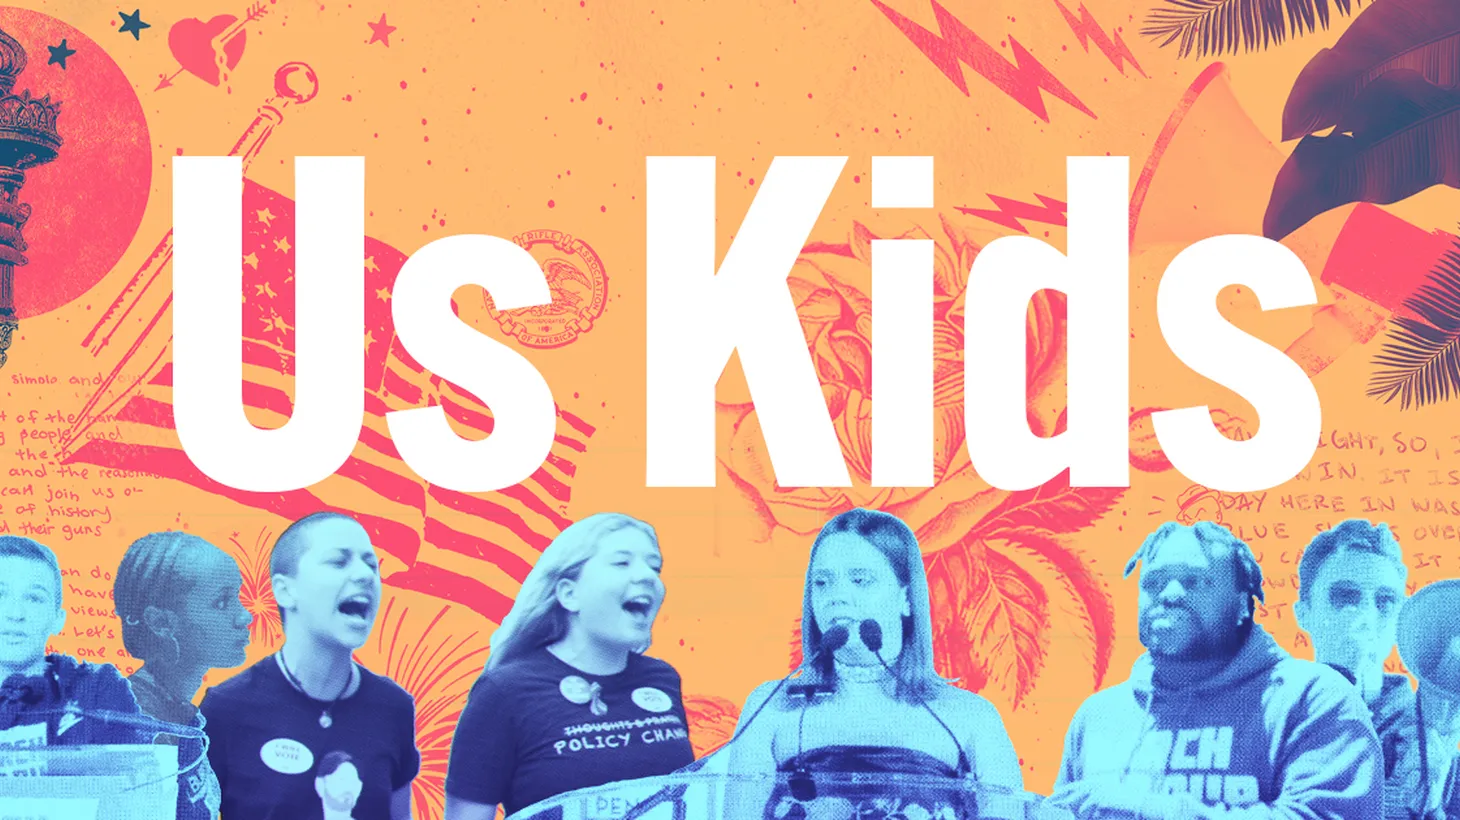 “Us Kids” focuses on the March For Our Lives movement, and is directed by Kim A. Snyder.